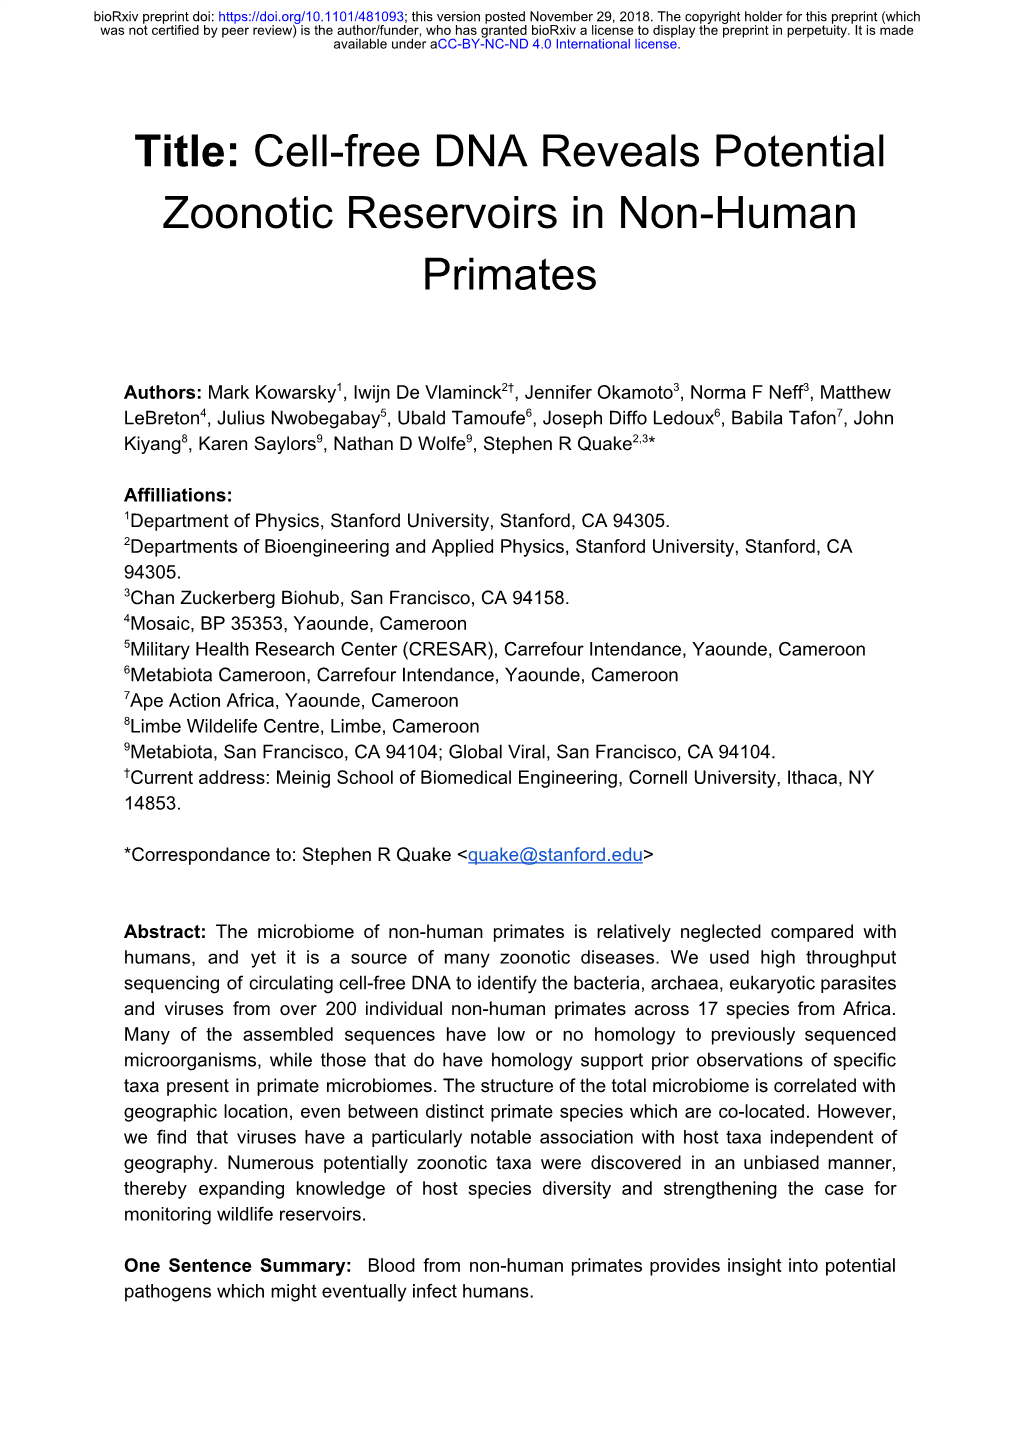 Cell-Free DNA Reveals Potential Zoonotic Reservoirs in Non-Human